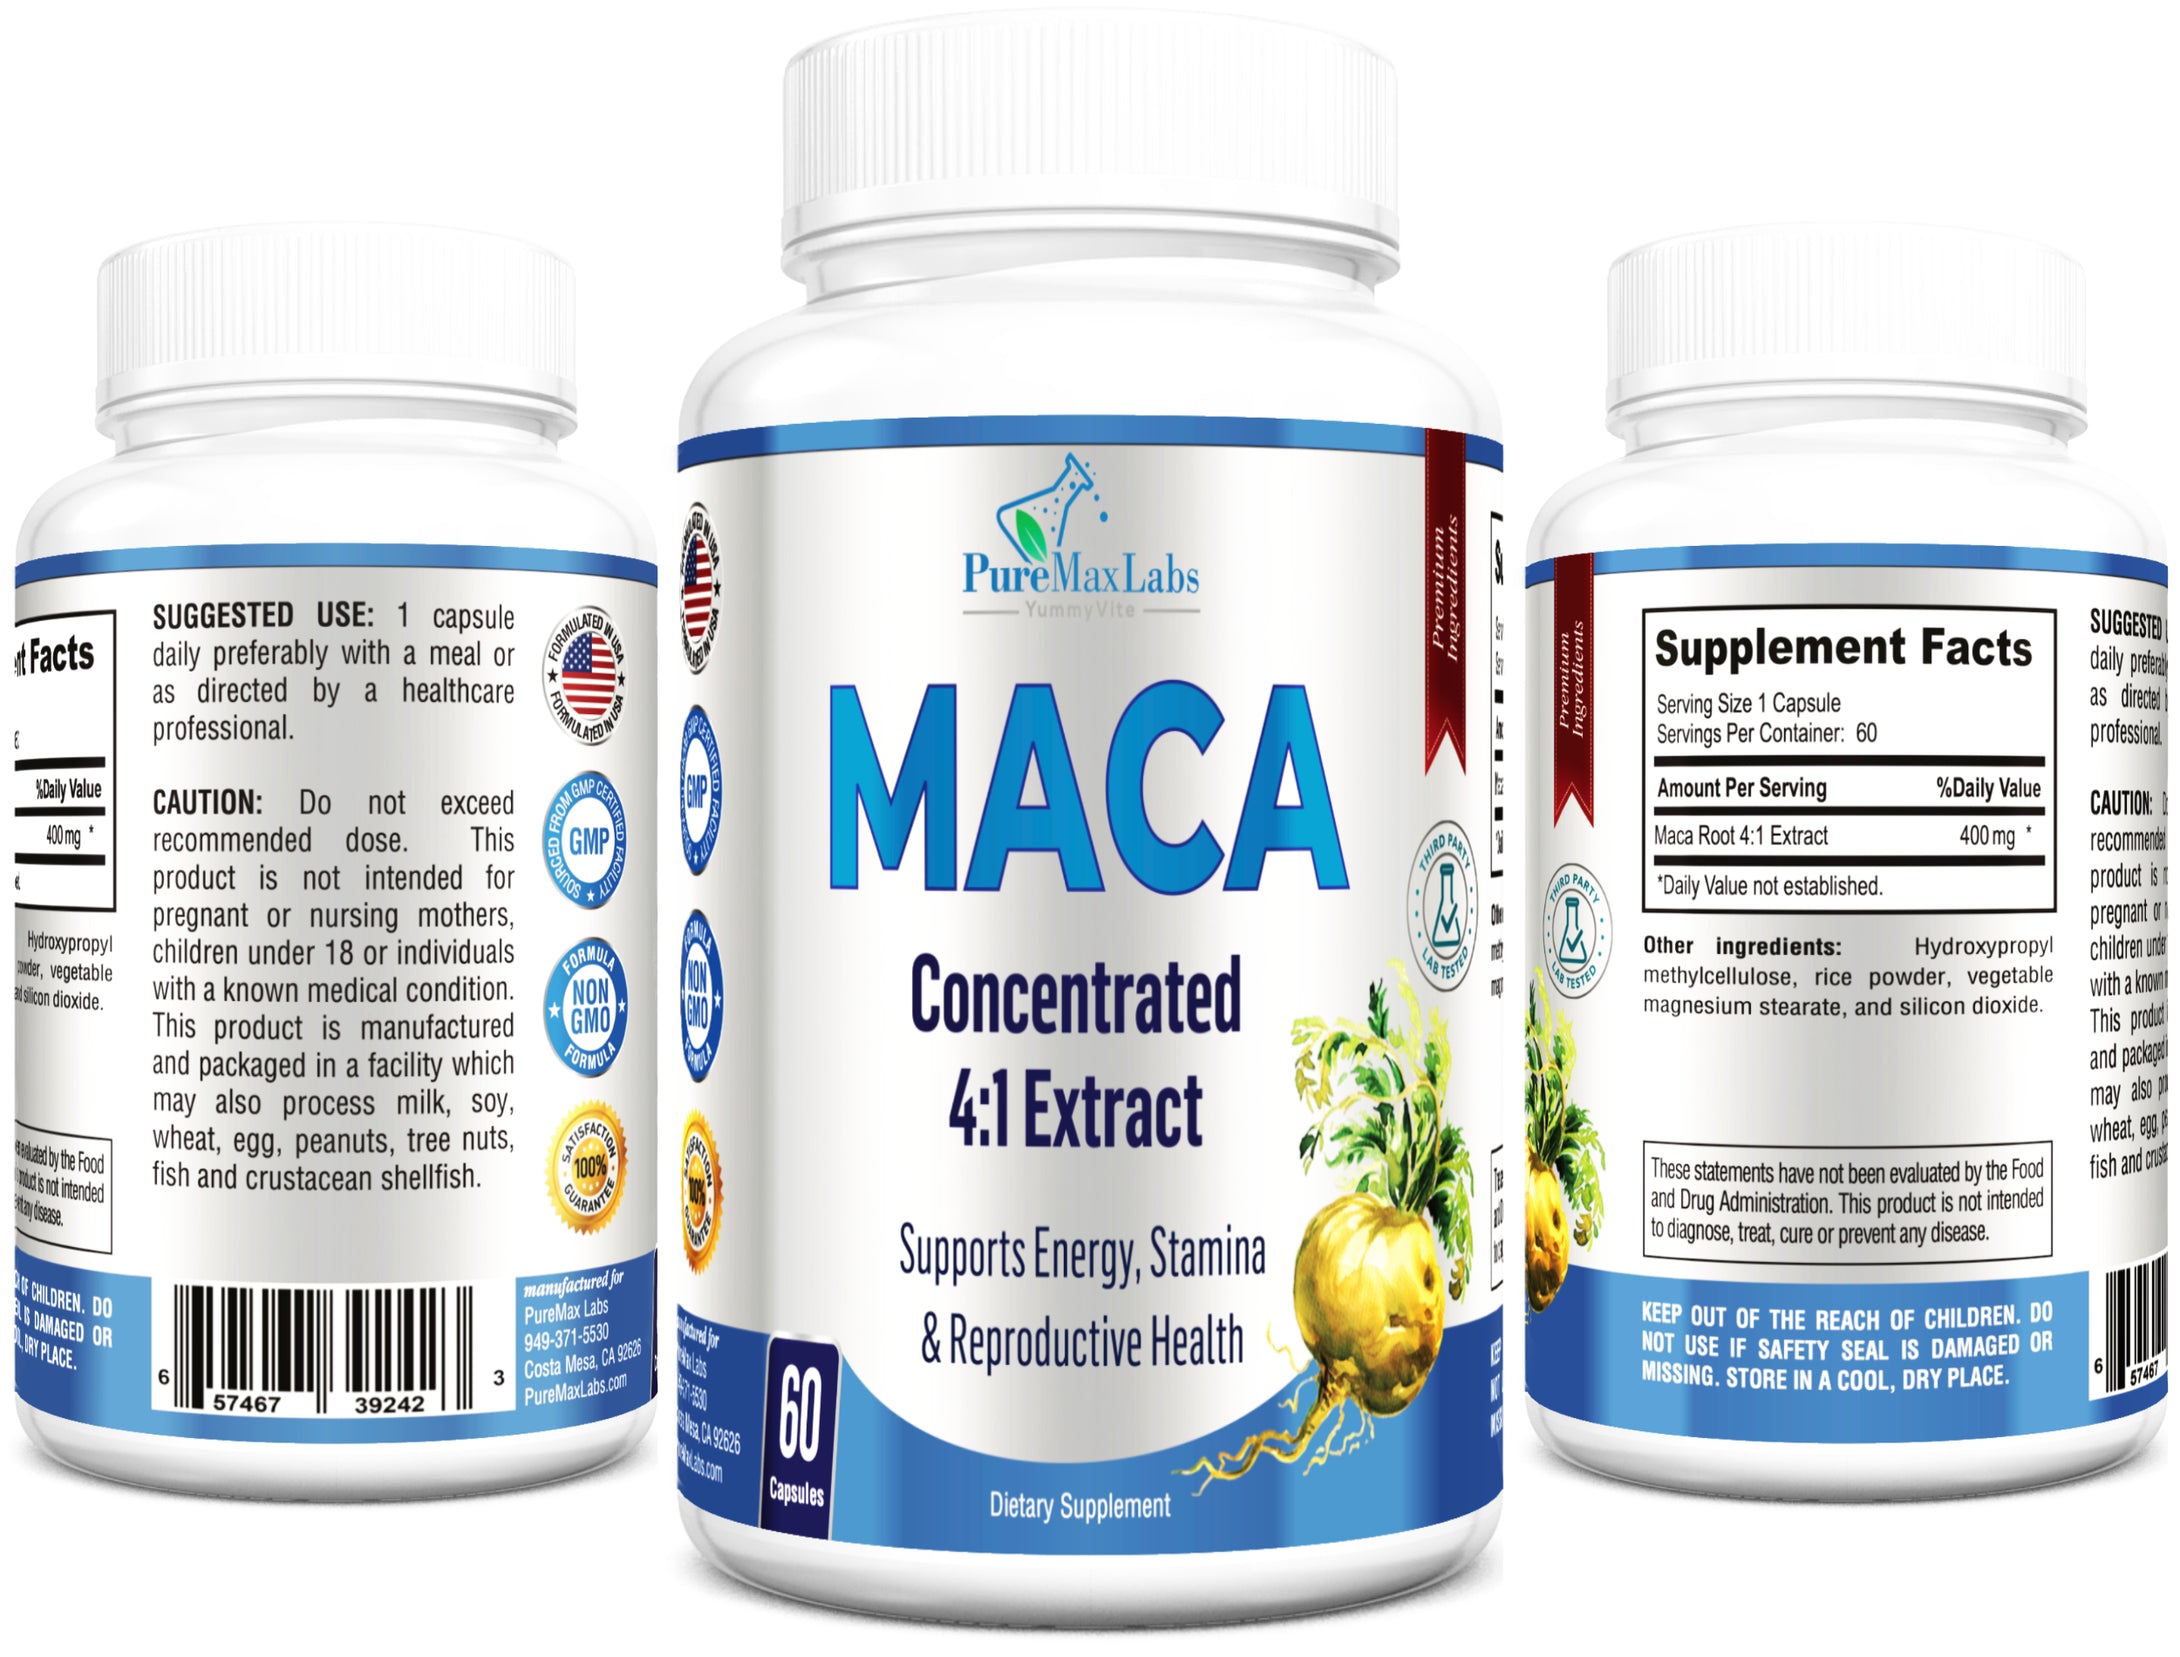 Maca Root Capsules - Concentrated 4:1 Extract (Equivalent to 1,600mg per Capsule) - 60 Capsules